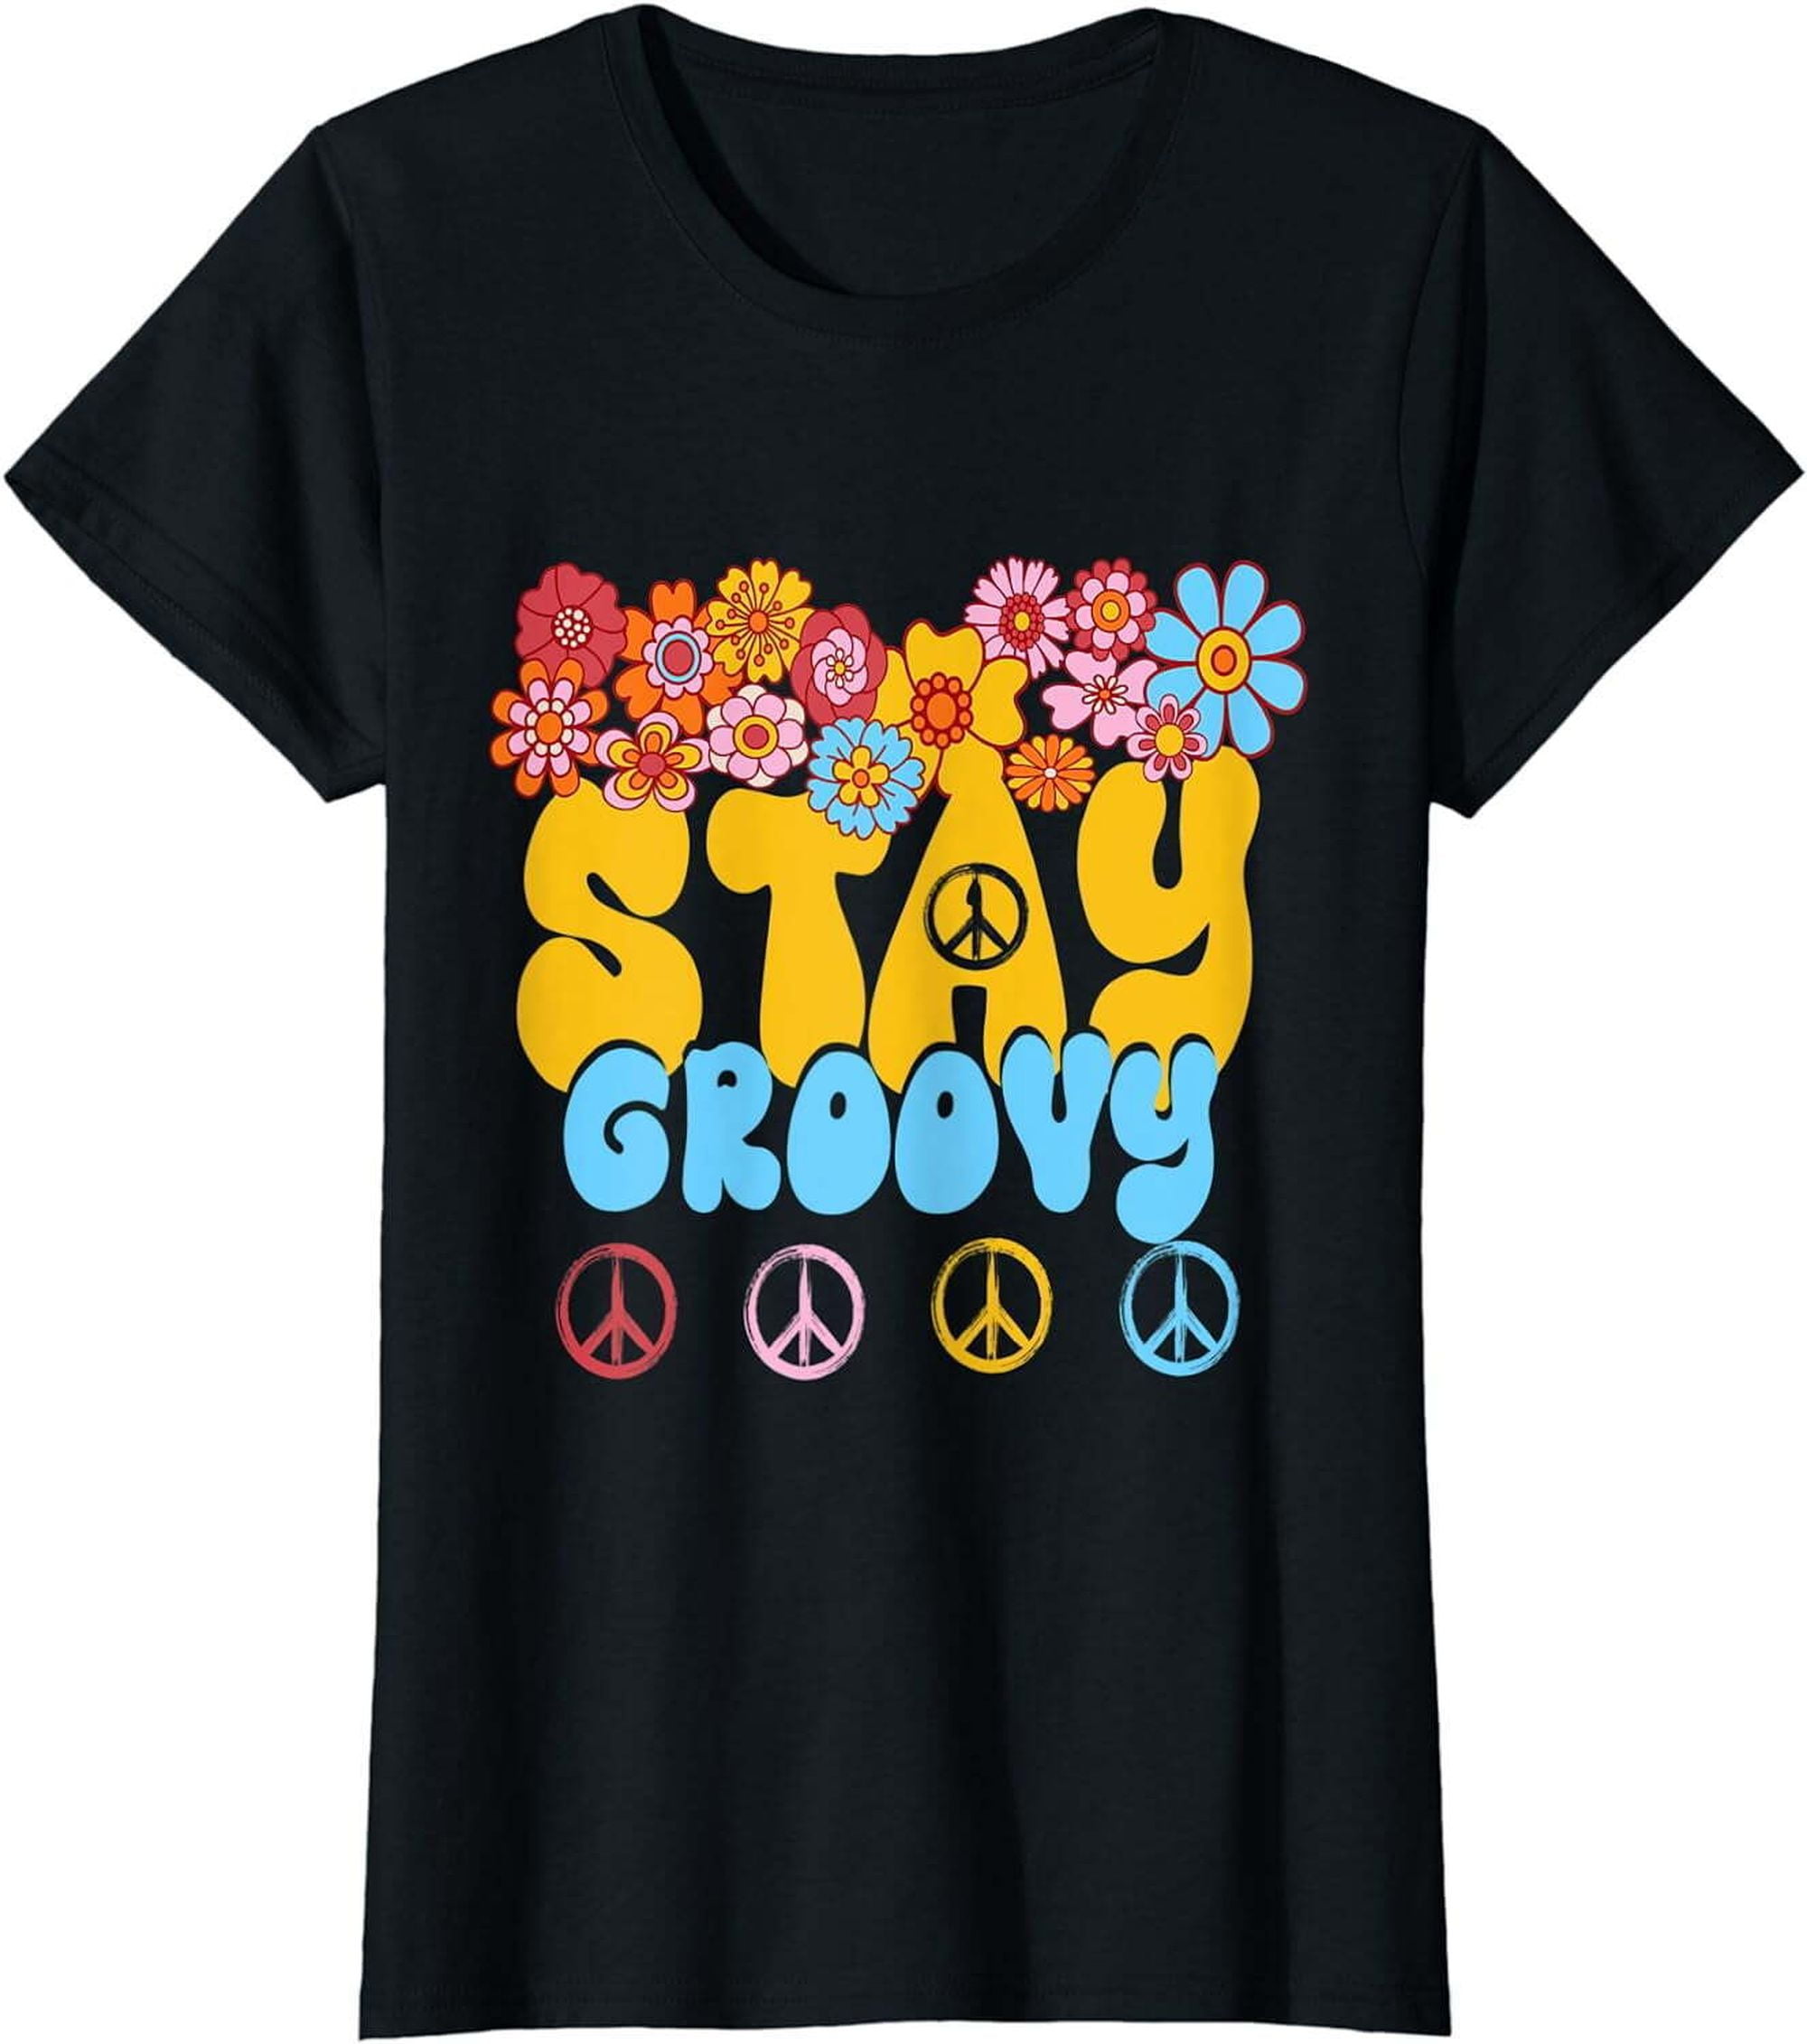 Retro Peace and Sunflowers: Women's Groovy 60s 70s Hippie T-Shirt ...